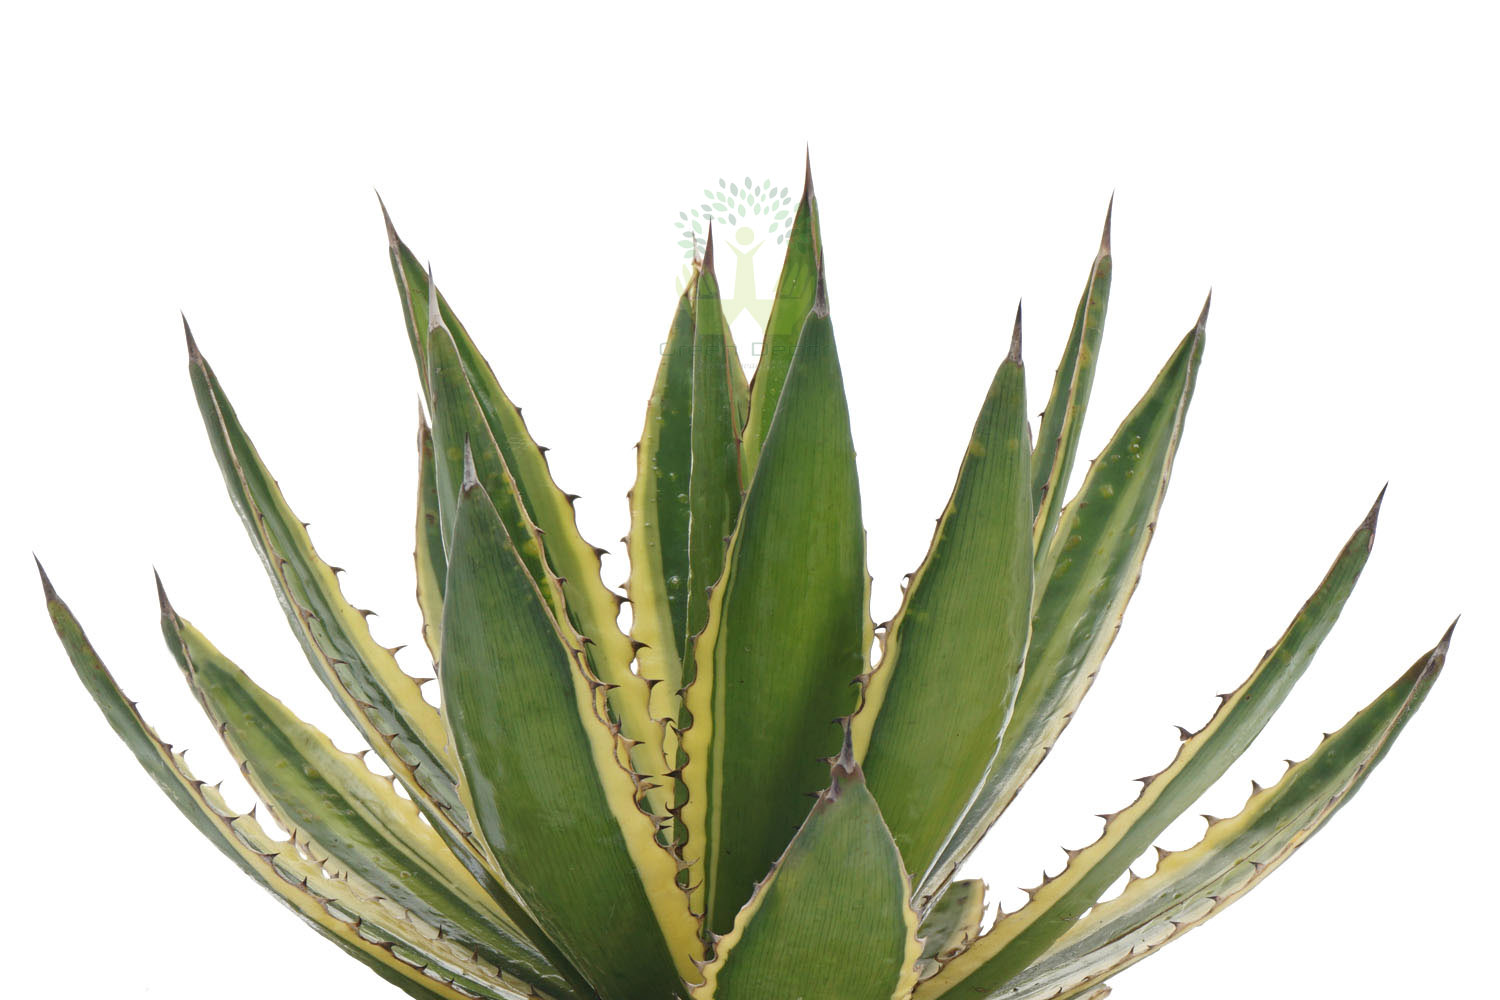 Buy Agave Lophantha Plants Leaves View , White Pots and seeds in Delhi NCR by the best online nursery shop Greendecor.